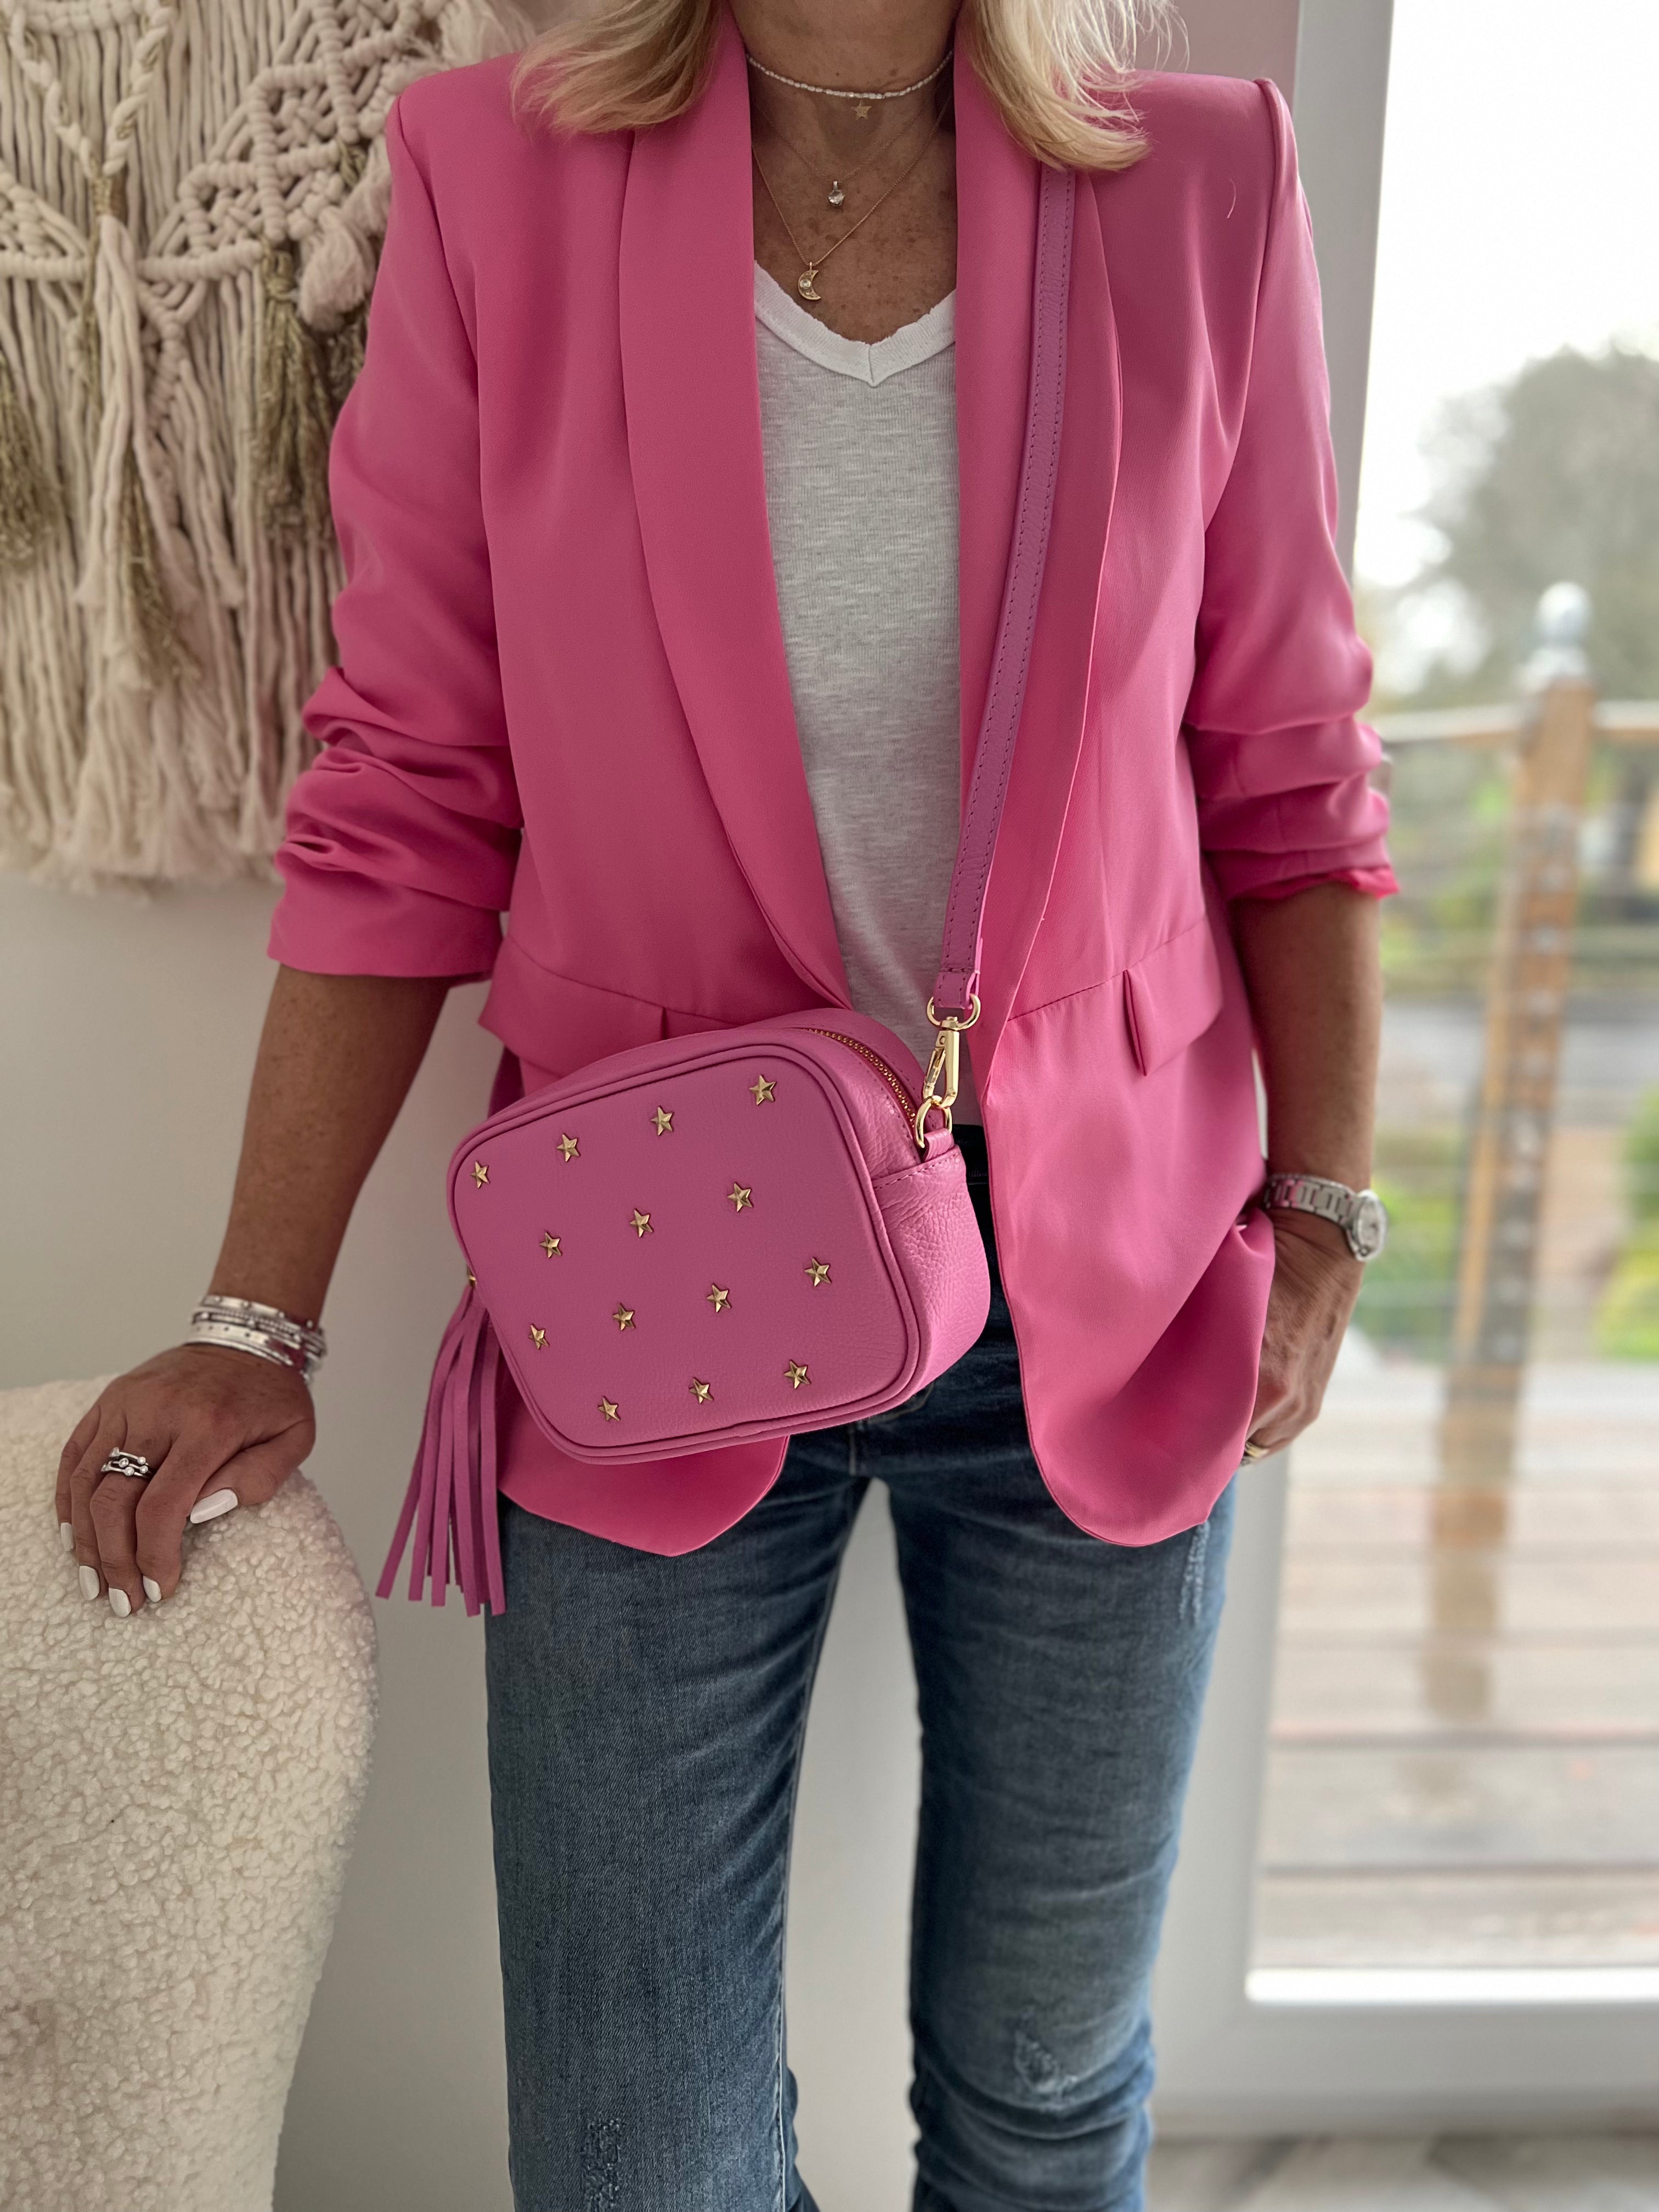 Leather Studded Crossbody Bag in Hot Pink